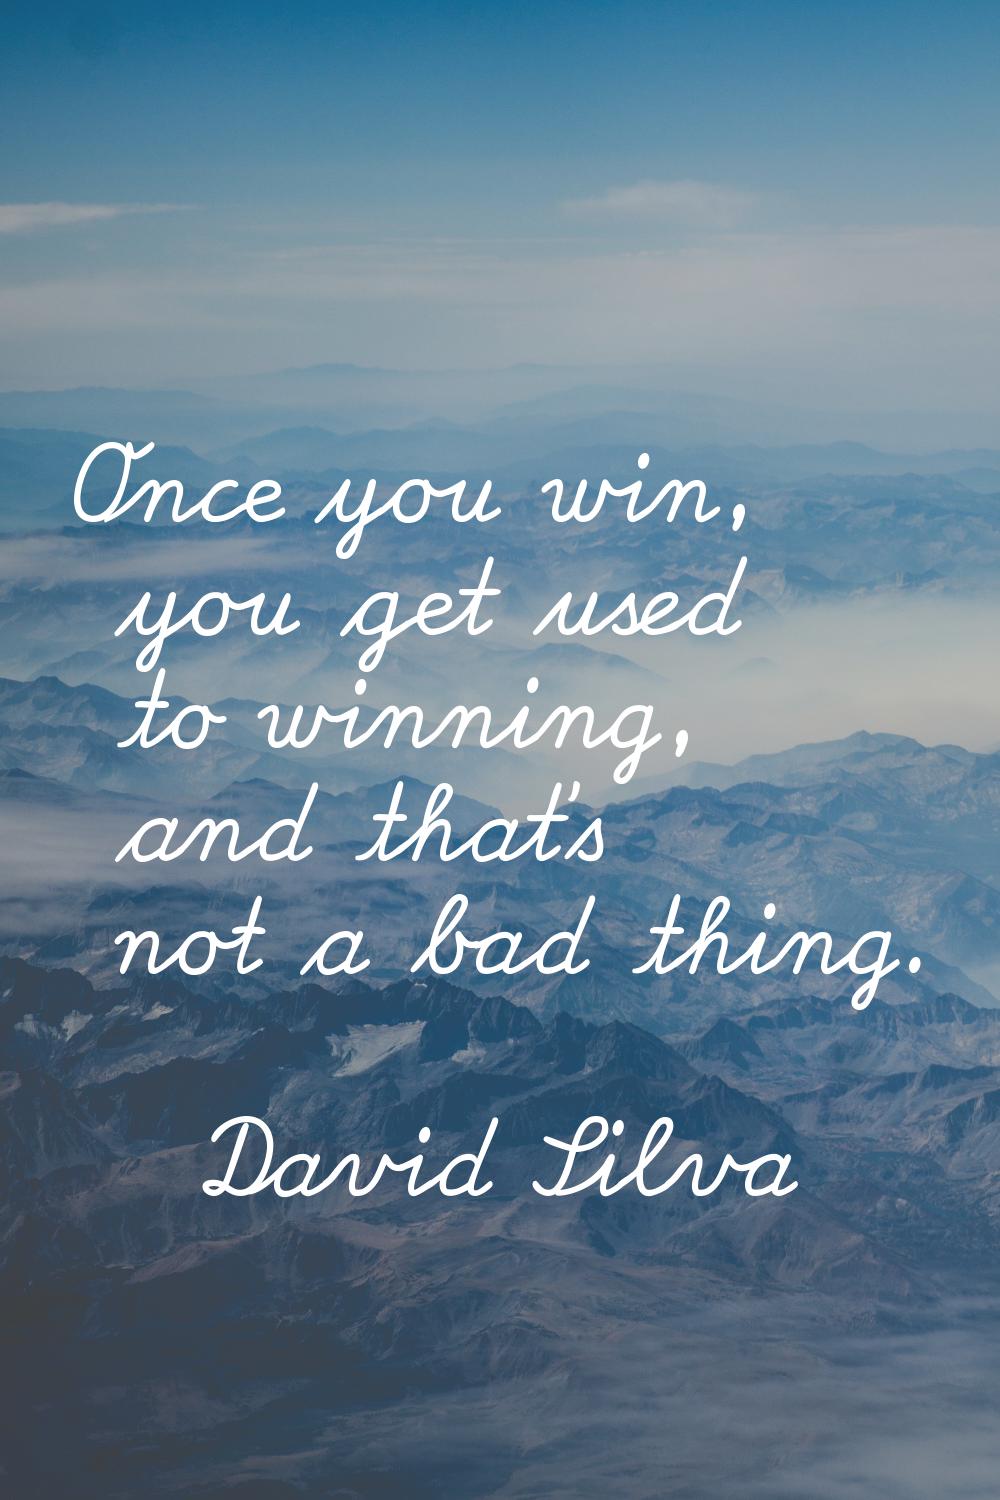 Once you win, you get used to winning, and that's not a bad thing.